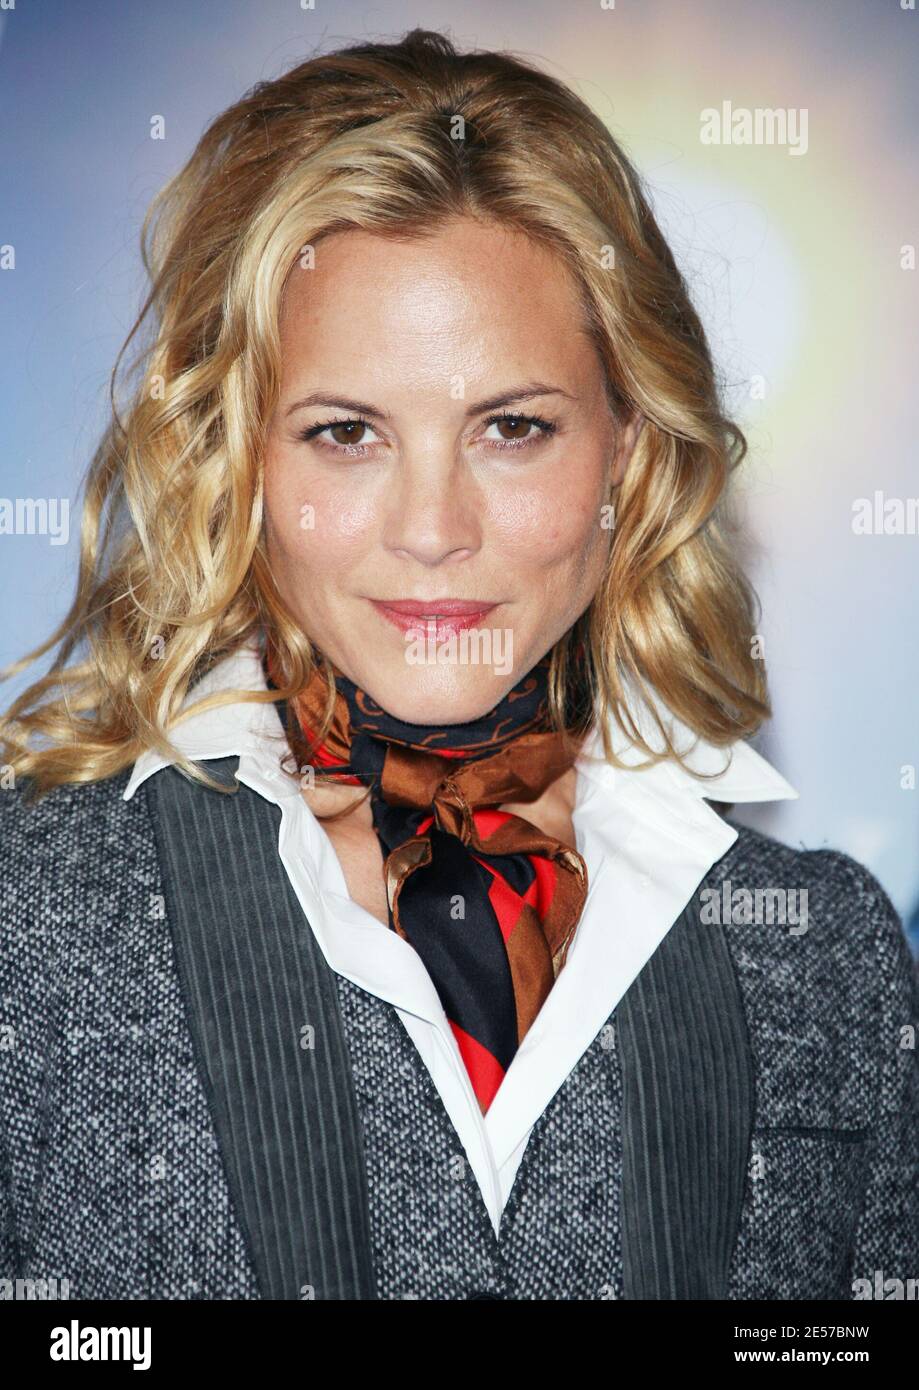 Actress Maria Bello poses during the photocall for 'The yellow handkerchief' as a part of the 34th American Film Festival in Deauville, France, on September 11, 2008. Photo by Denis Guignebourg/ABACAPRESS.COM Stock Photo